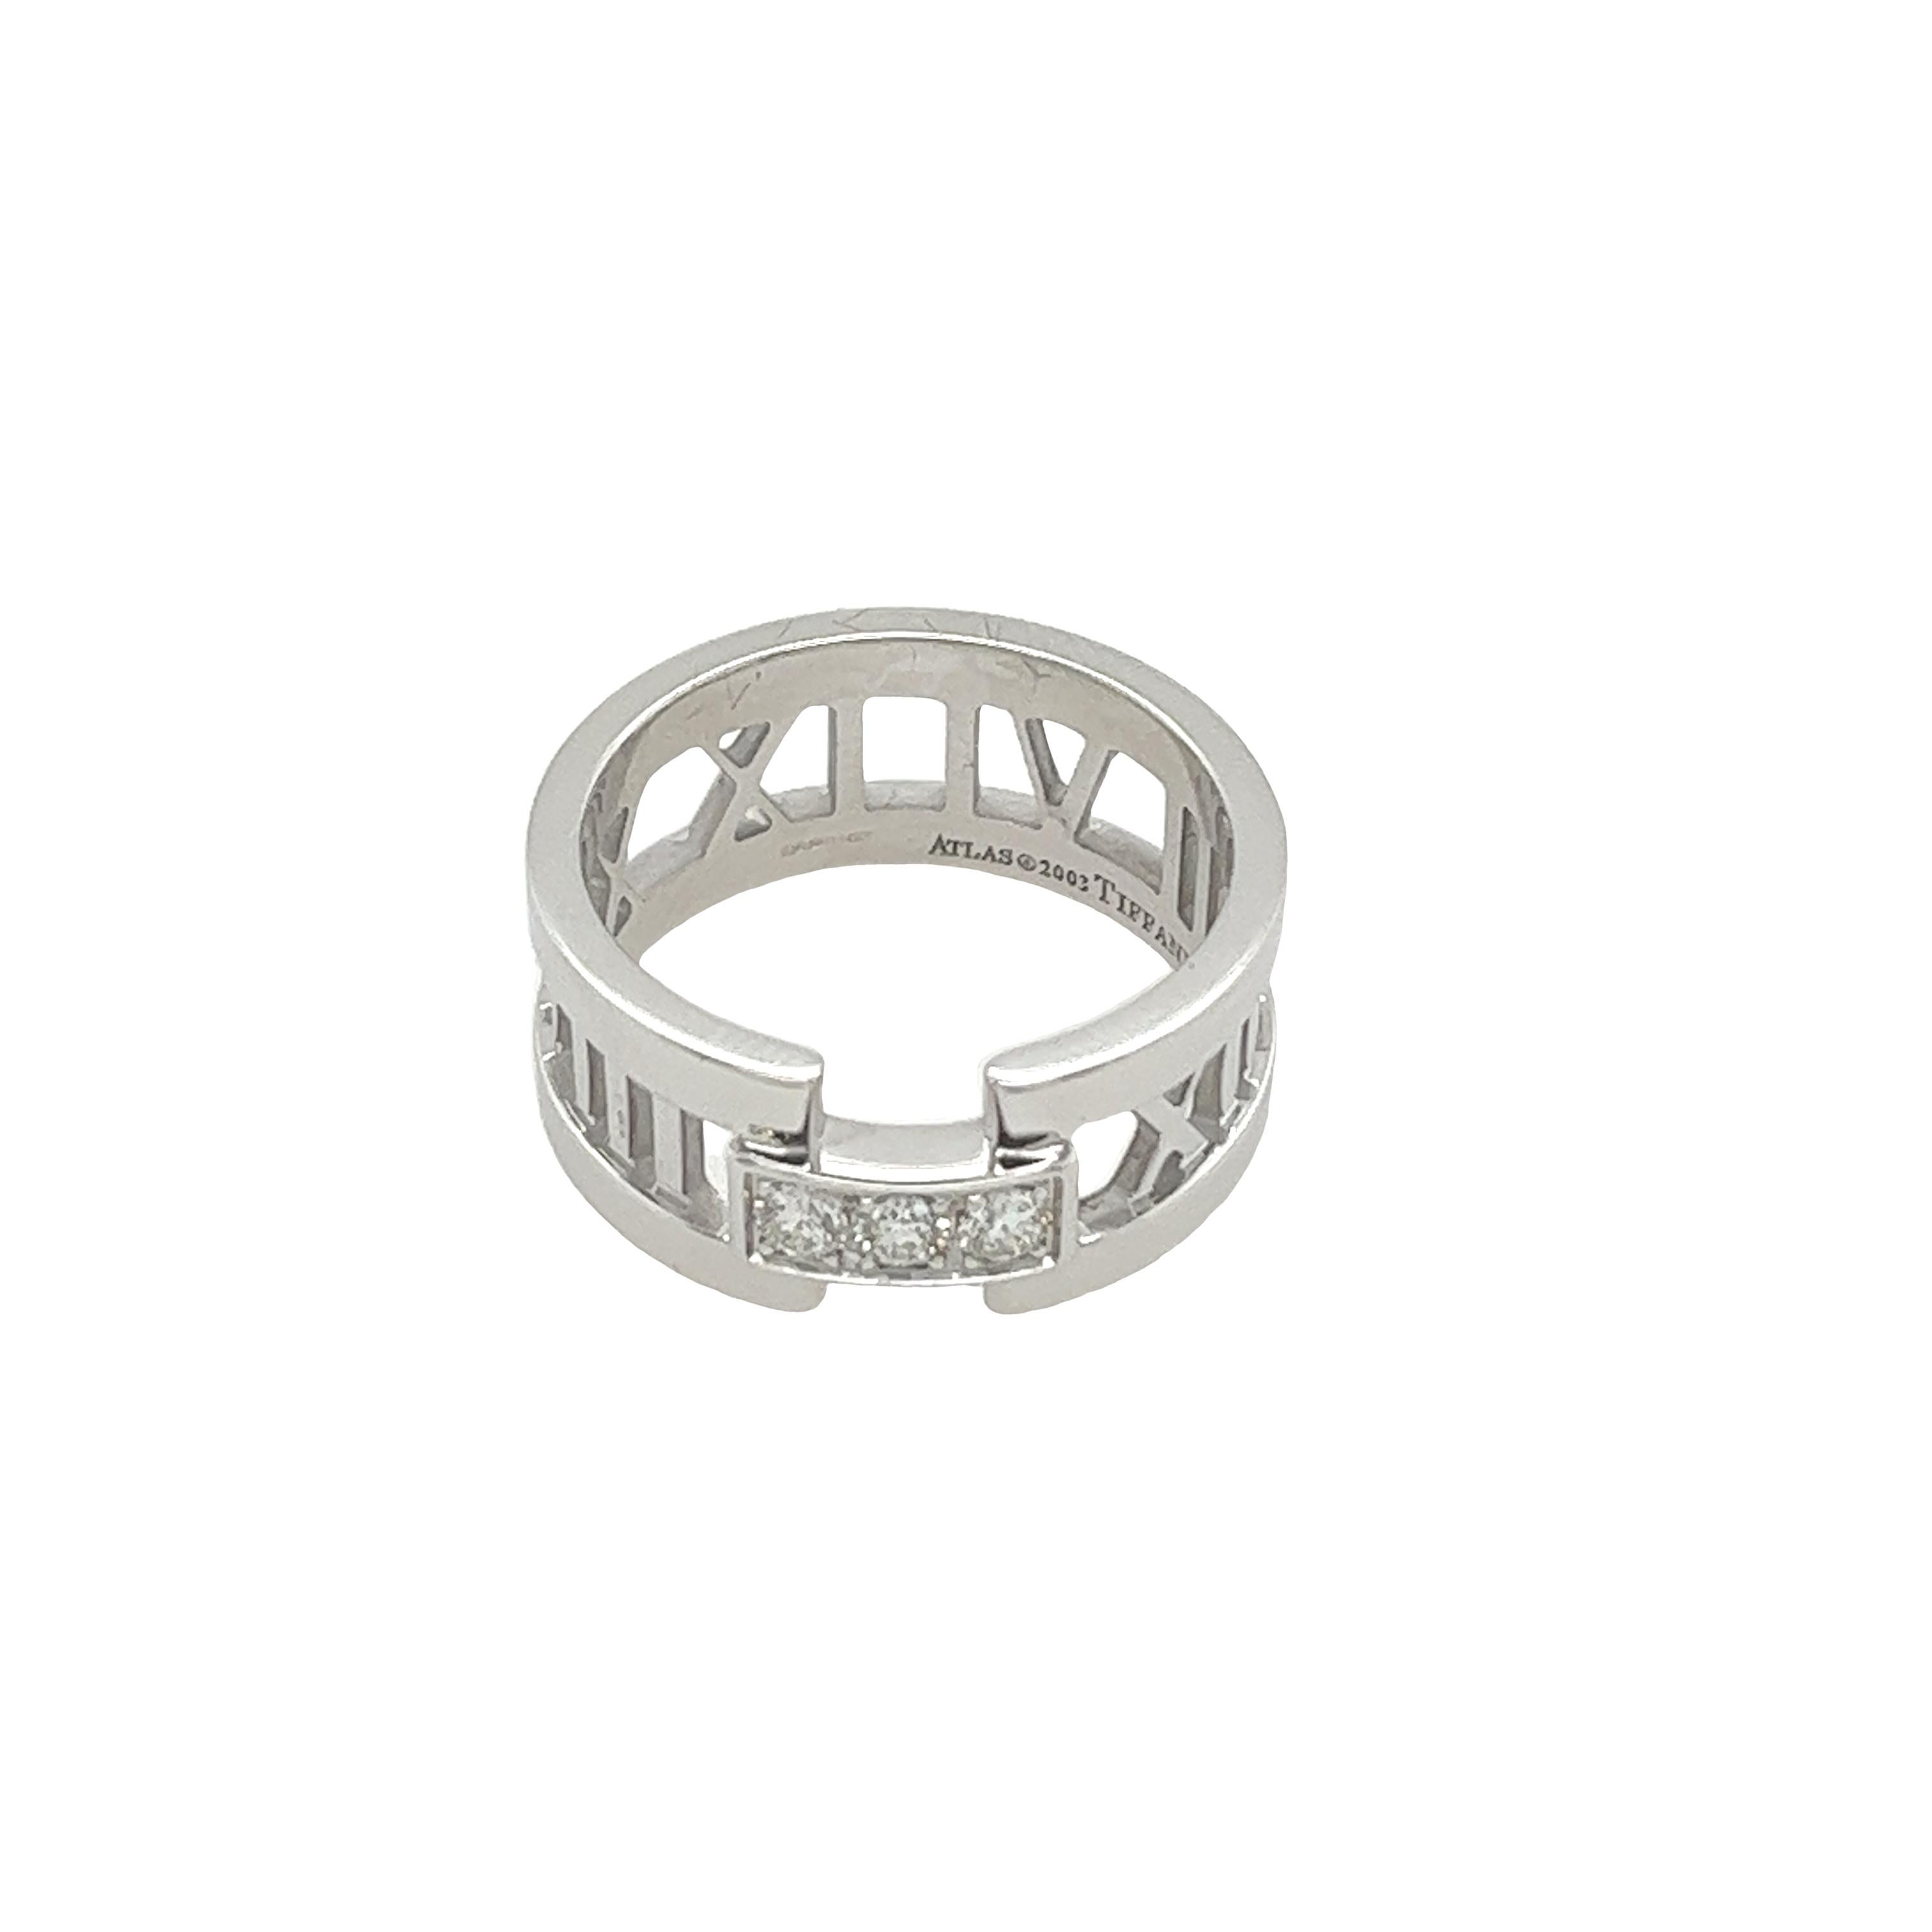 Tiffany & Co Atlas Ring in 18ct White Gold With Roman Numbers  2